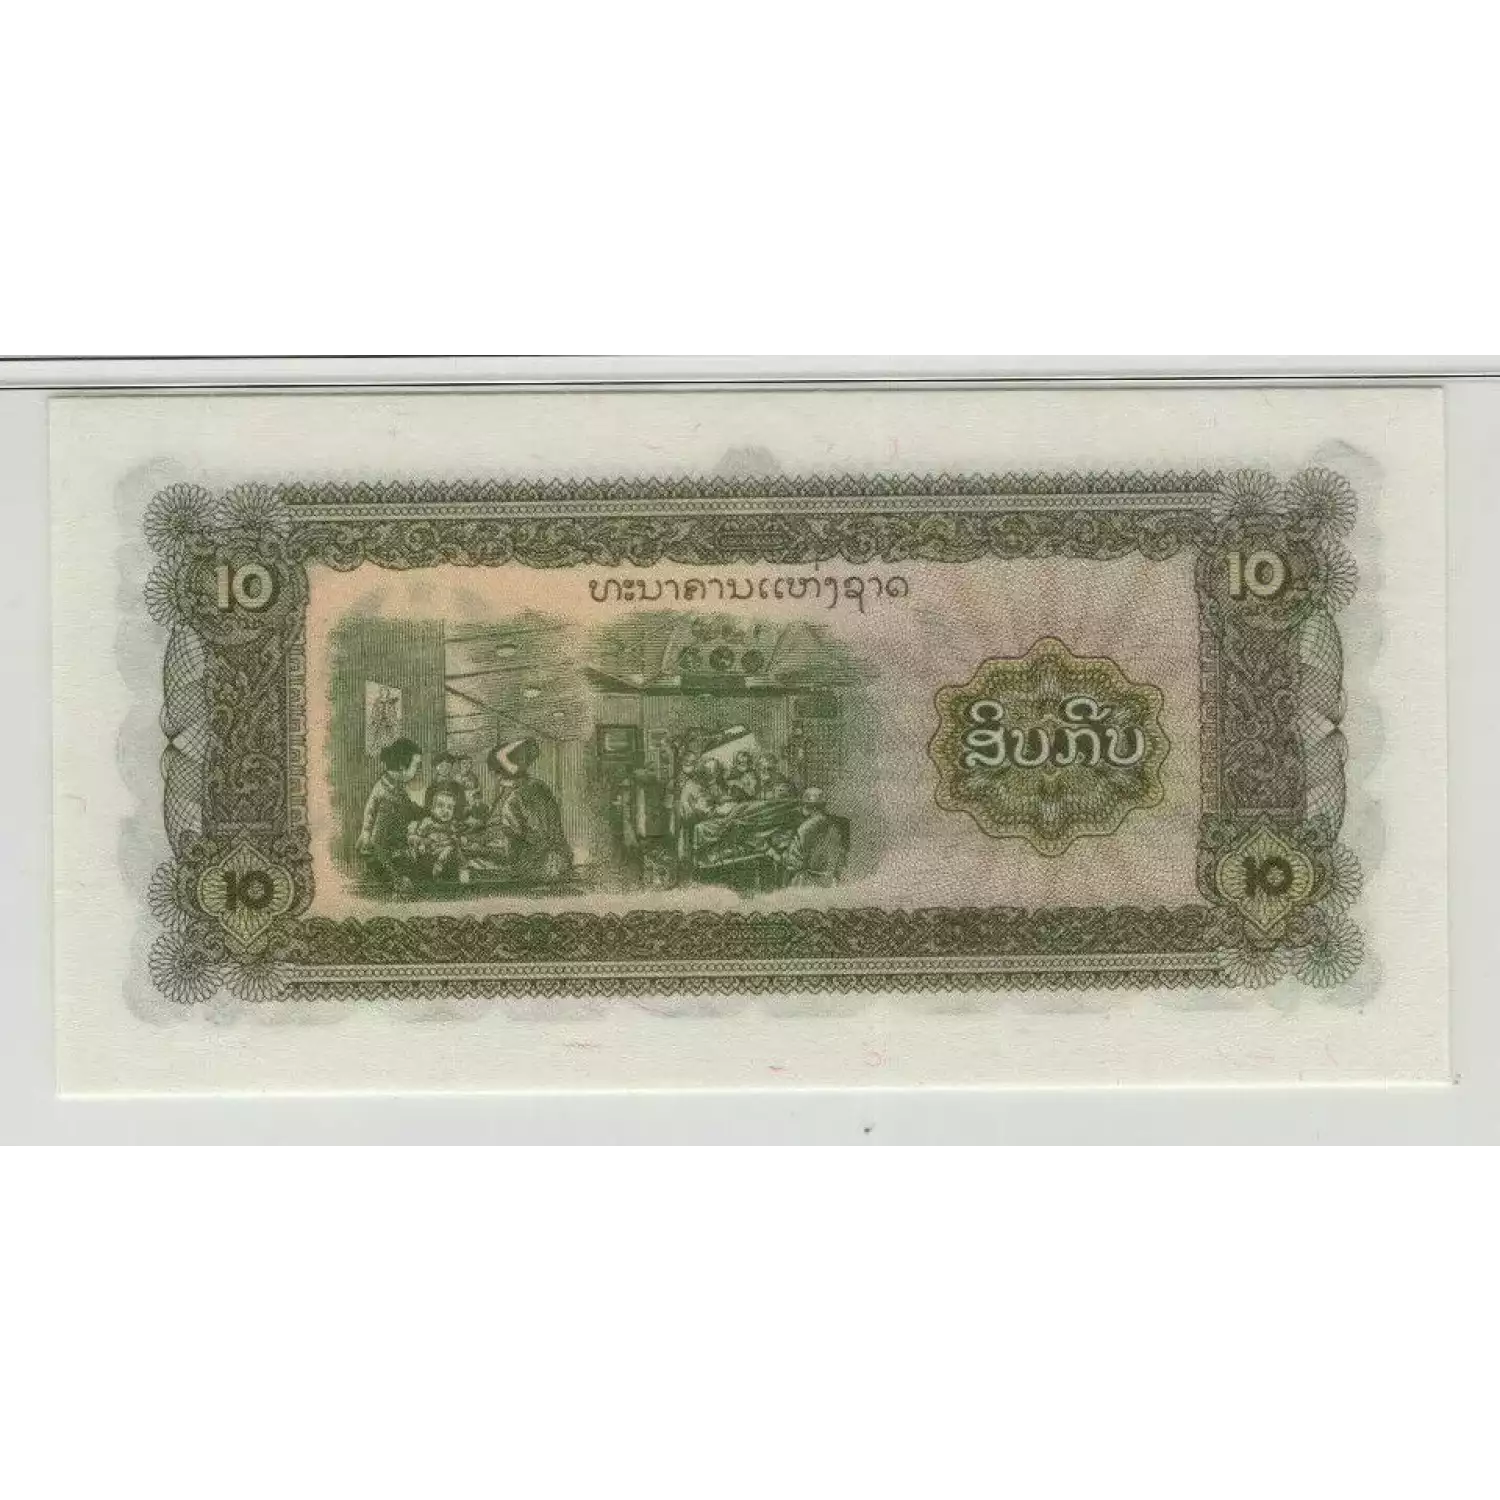 10 Kip ND (1979), 1979 ND; 1988 Issue a. Issued note. Keup instead of Kip Laos 27 (4)